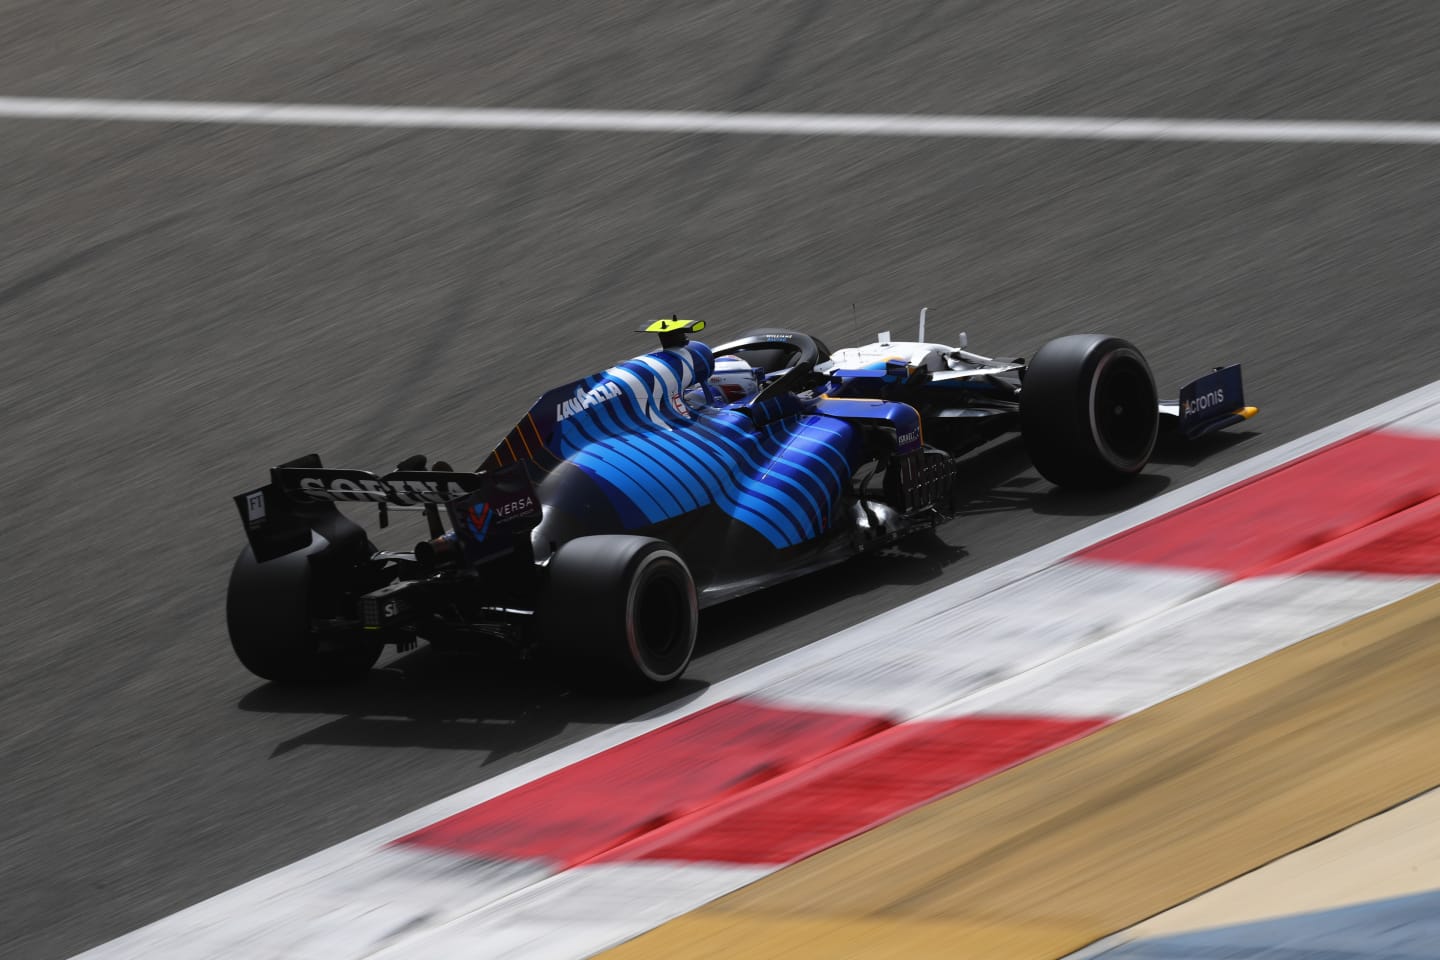 Nicholas Latifi had a couple of 'moments' in his first session behind the wheel for Williams